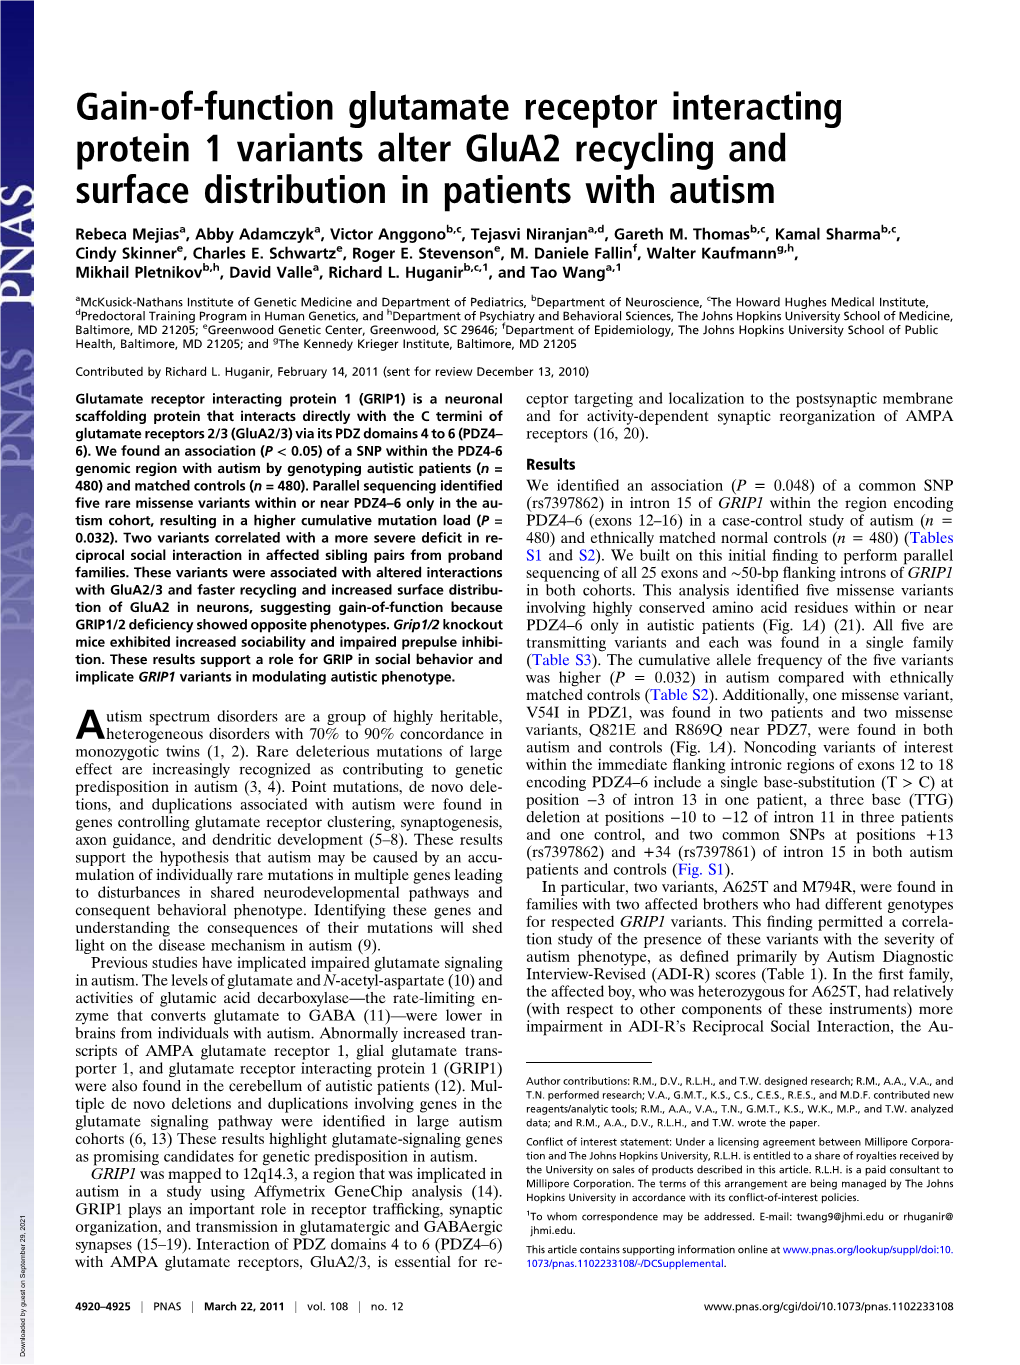 Gain-Of-Function Glutamate Receptor Interacting Protein 1 Variants Alter Glua2 Recycling and Surface Distribution in Patients with Autism